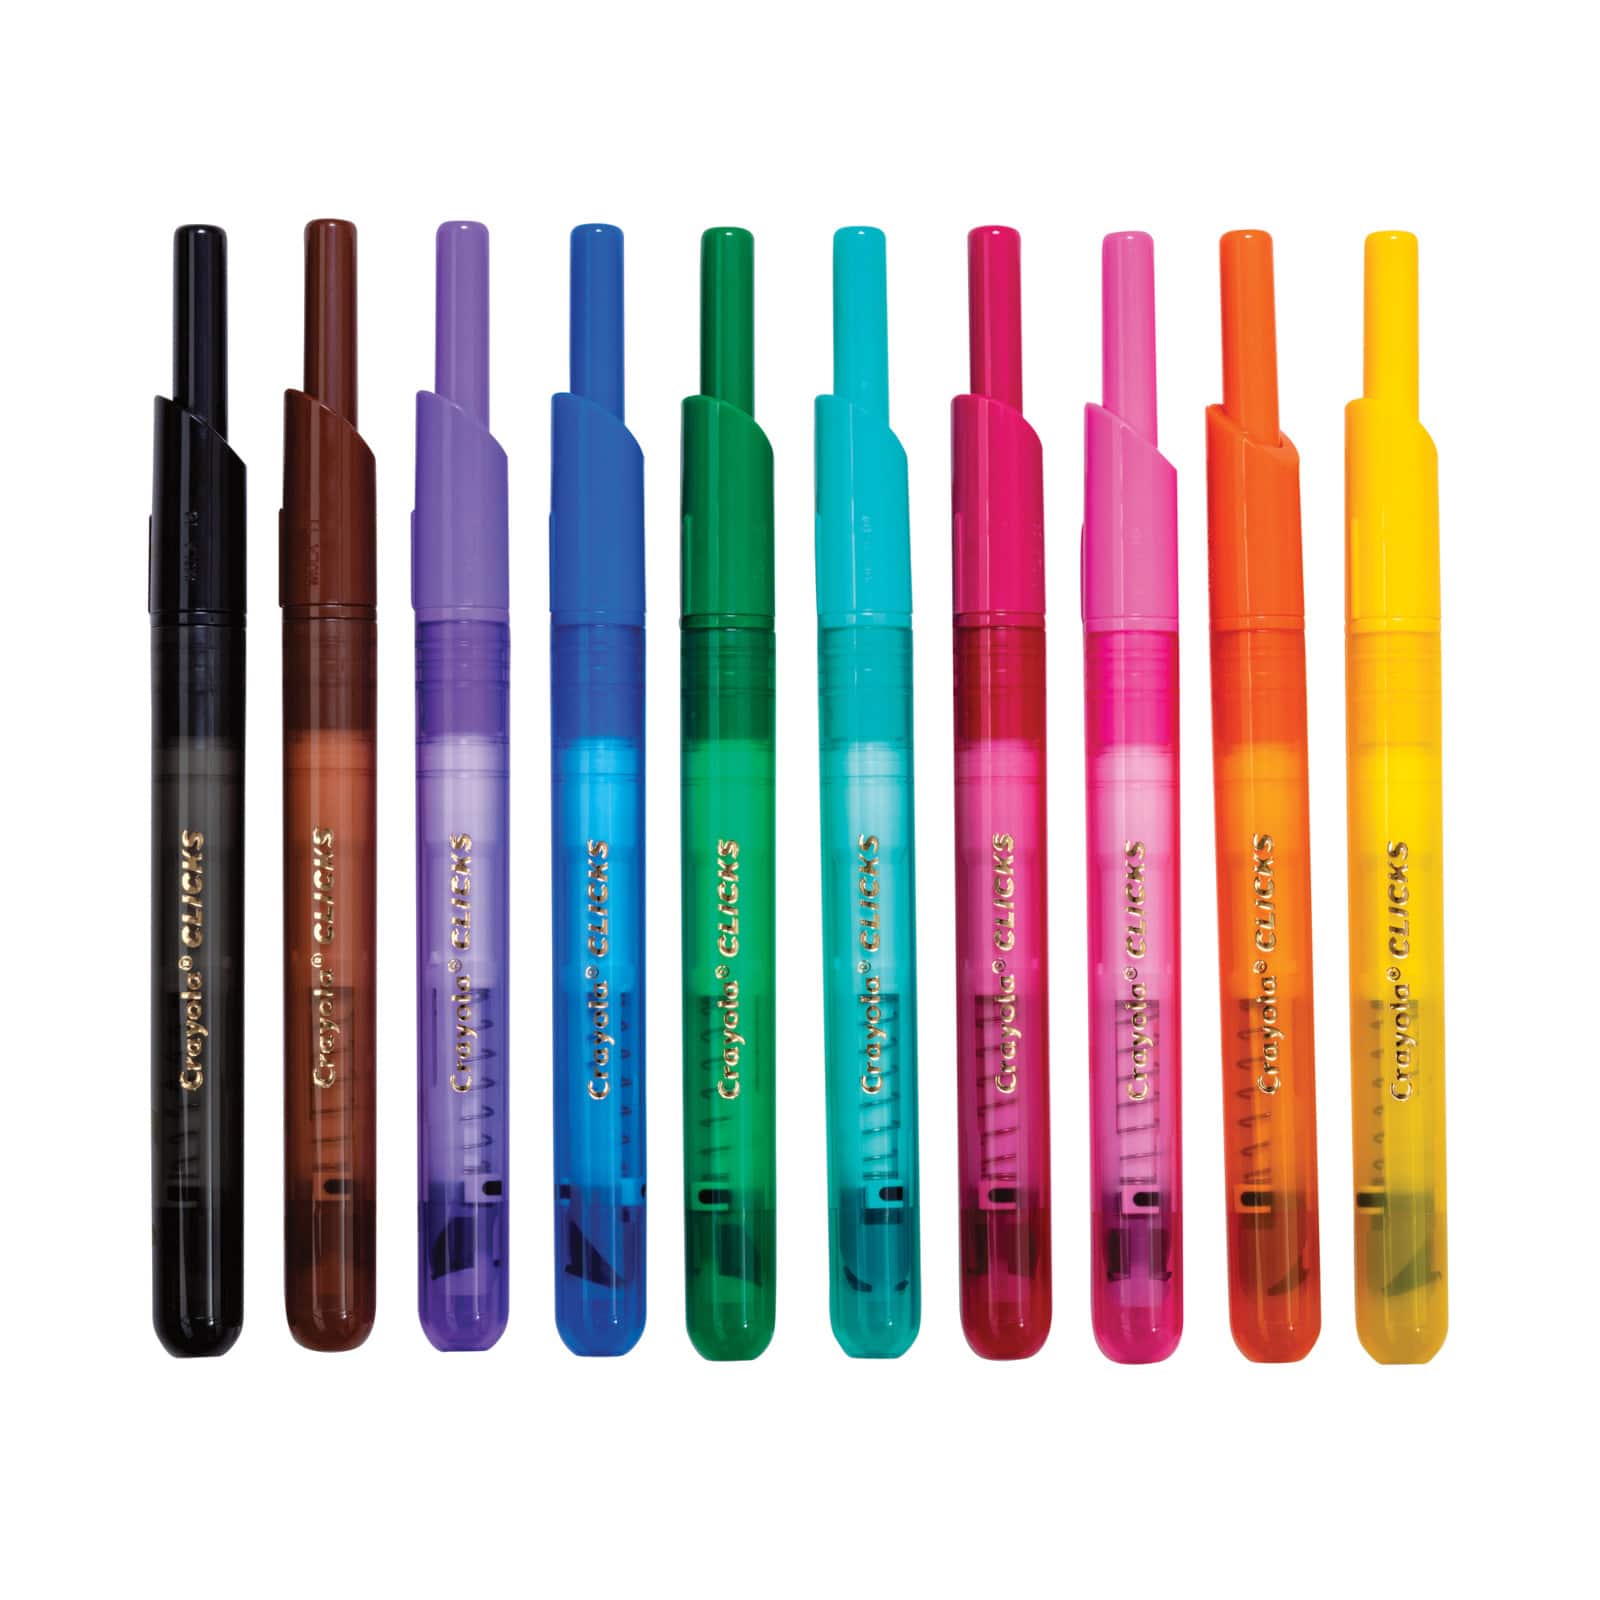 Crayola Clicks retractable markers are now in a 20 pack. @crayola #ra